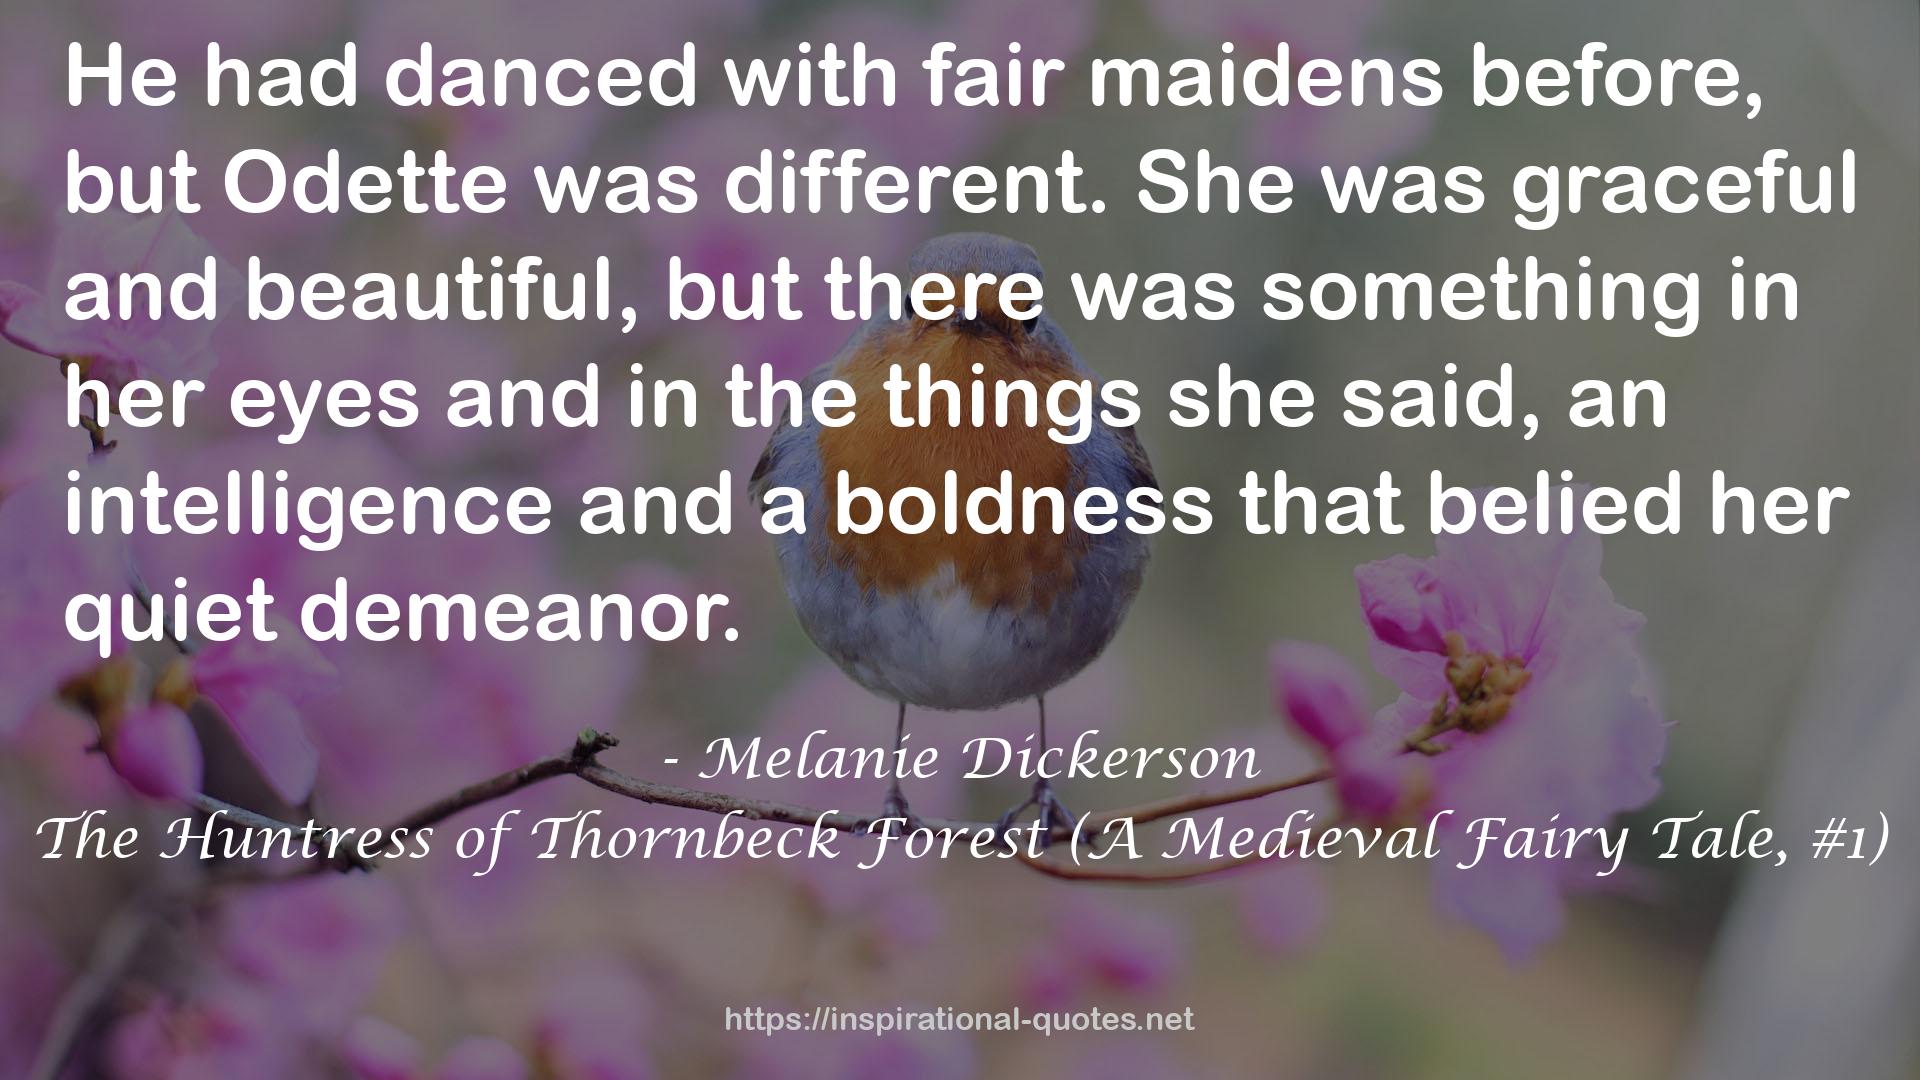 The Huntress of Thornbeck Forest (A Medieval Fairy Tale, #1) QUOTES